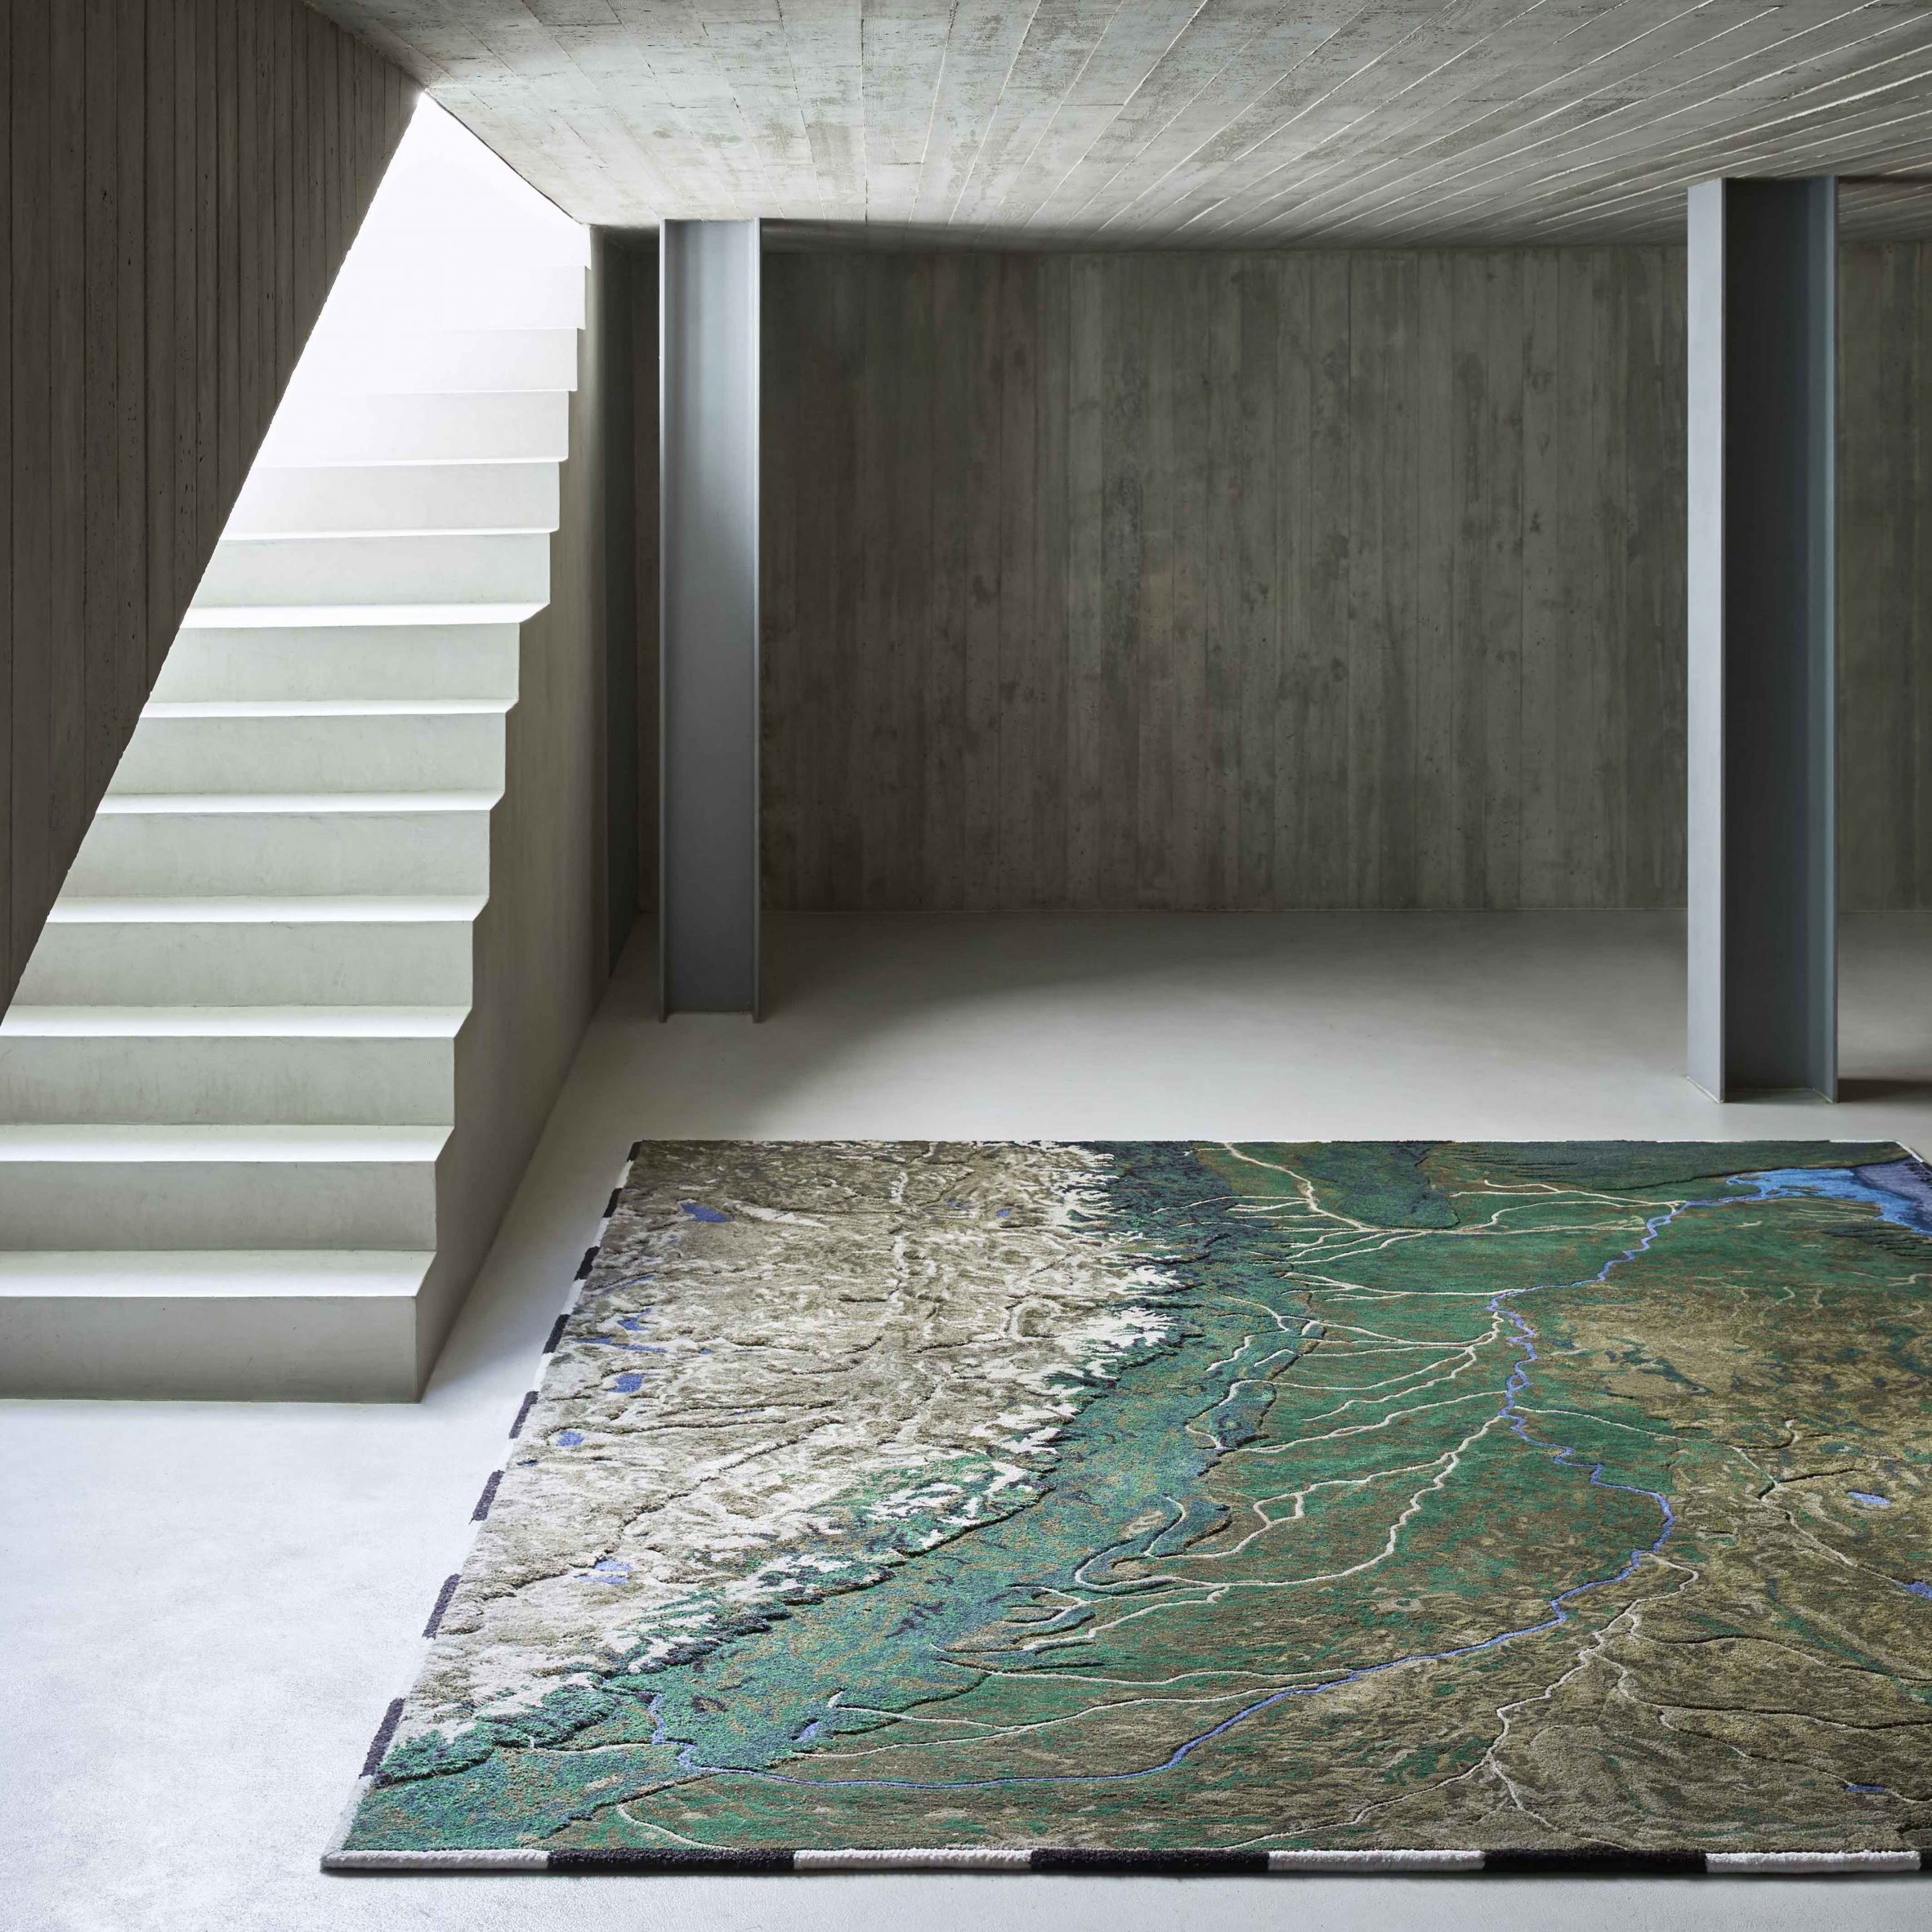 Rivers Plastic Rugs by Álvaro Catalán de Ocón for Gan in a Concrete Room with Stairs on the Left